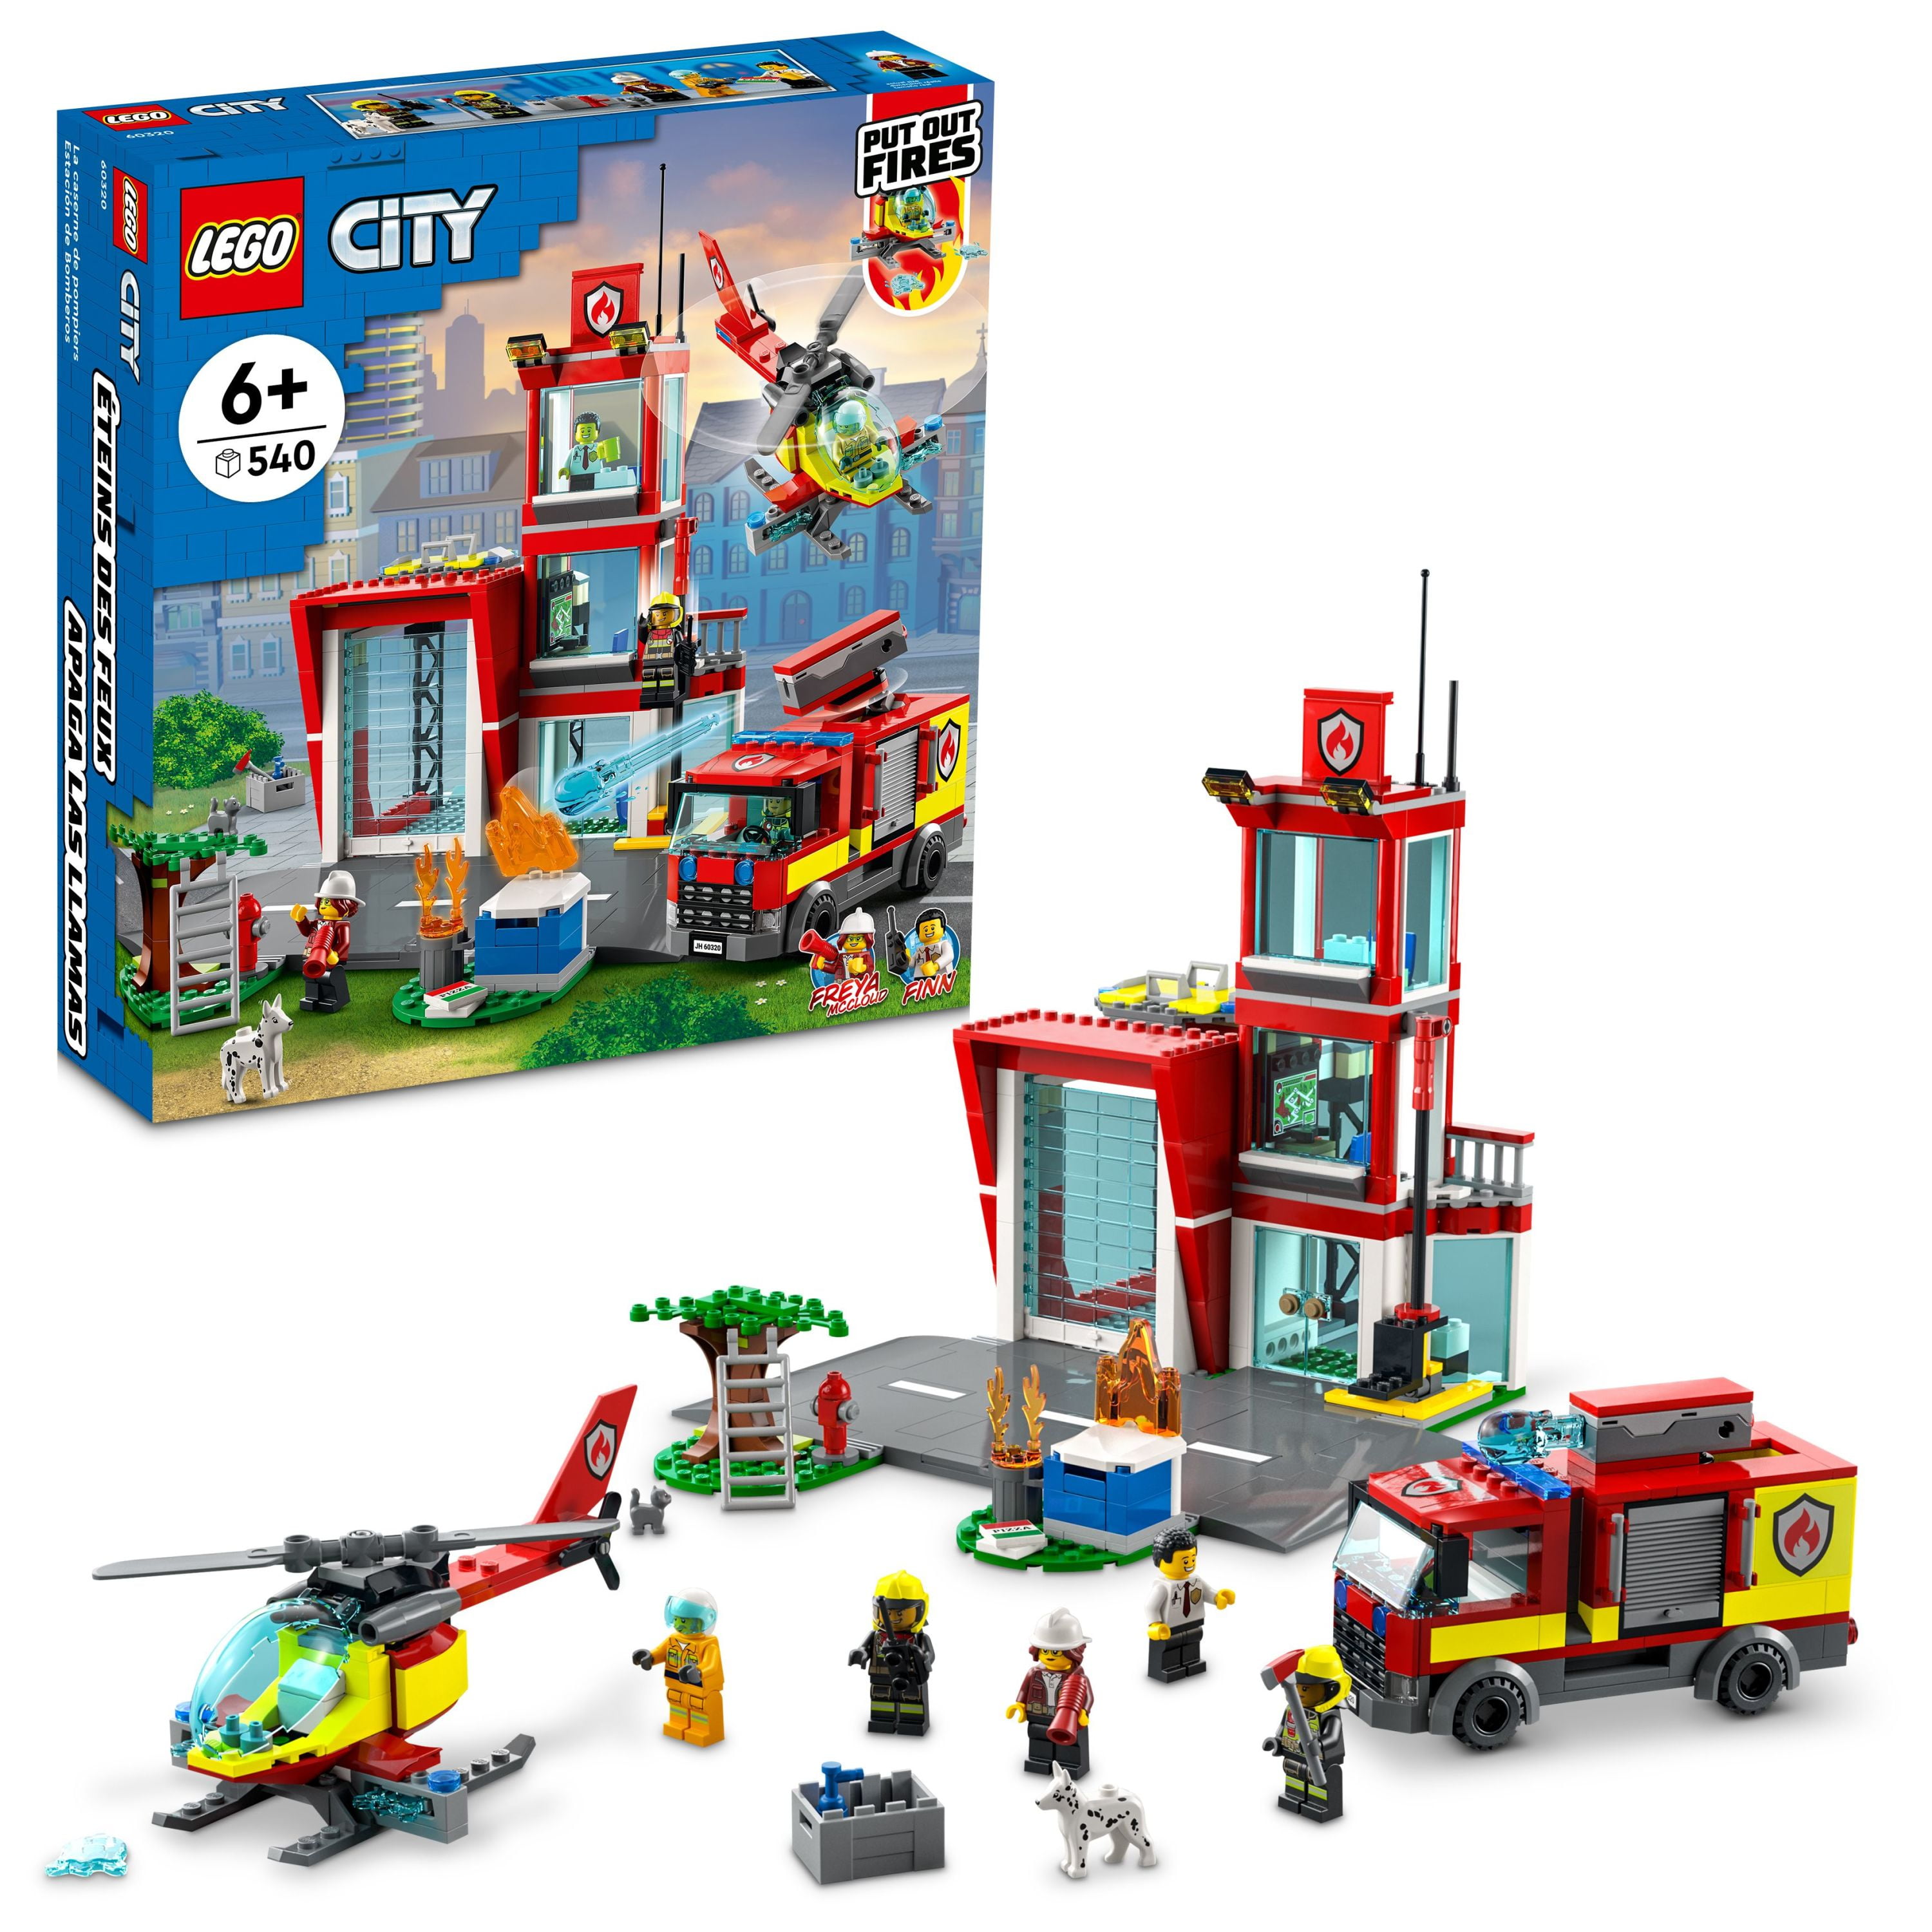 LEGO City Fire Station Set 60320 with Garage, Helicopter & Fire Engine Toys plus Firefighter Minifigures, Emergency Vehicles Playset, Gifts for Kids Age Plus Walmart.com